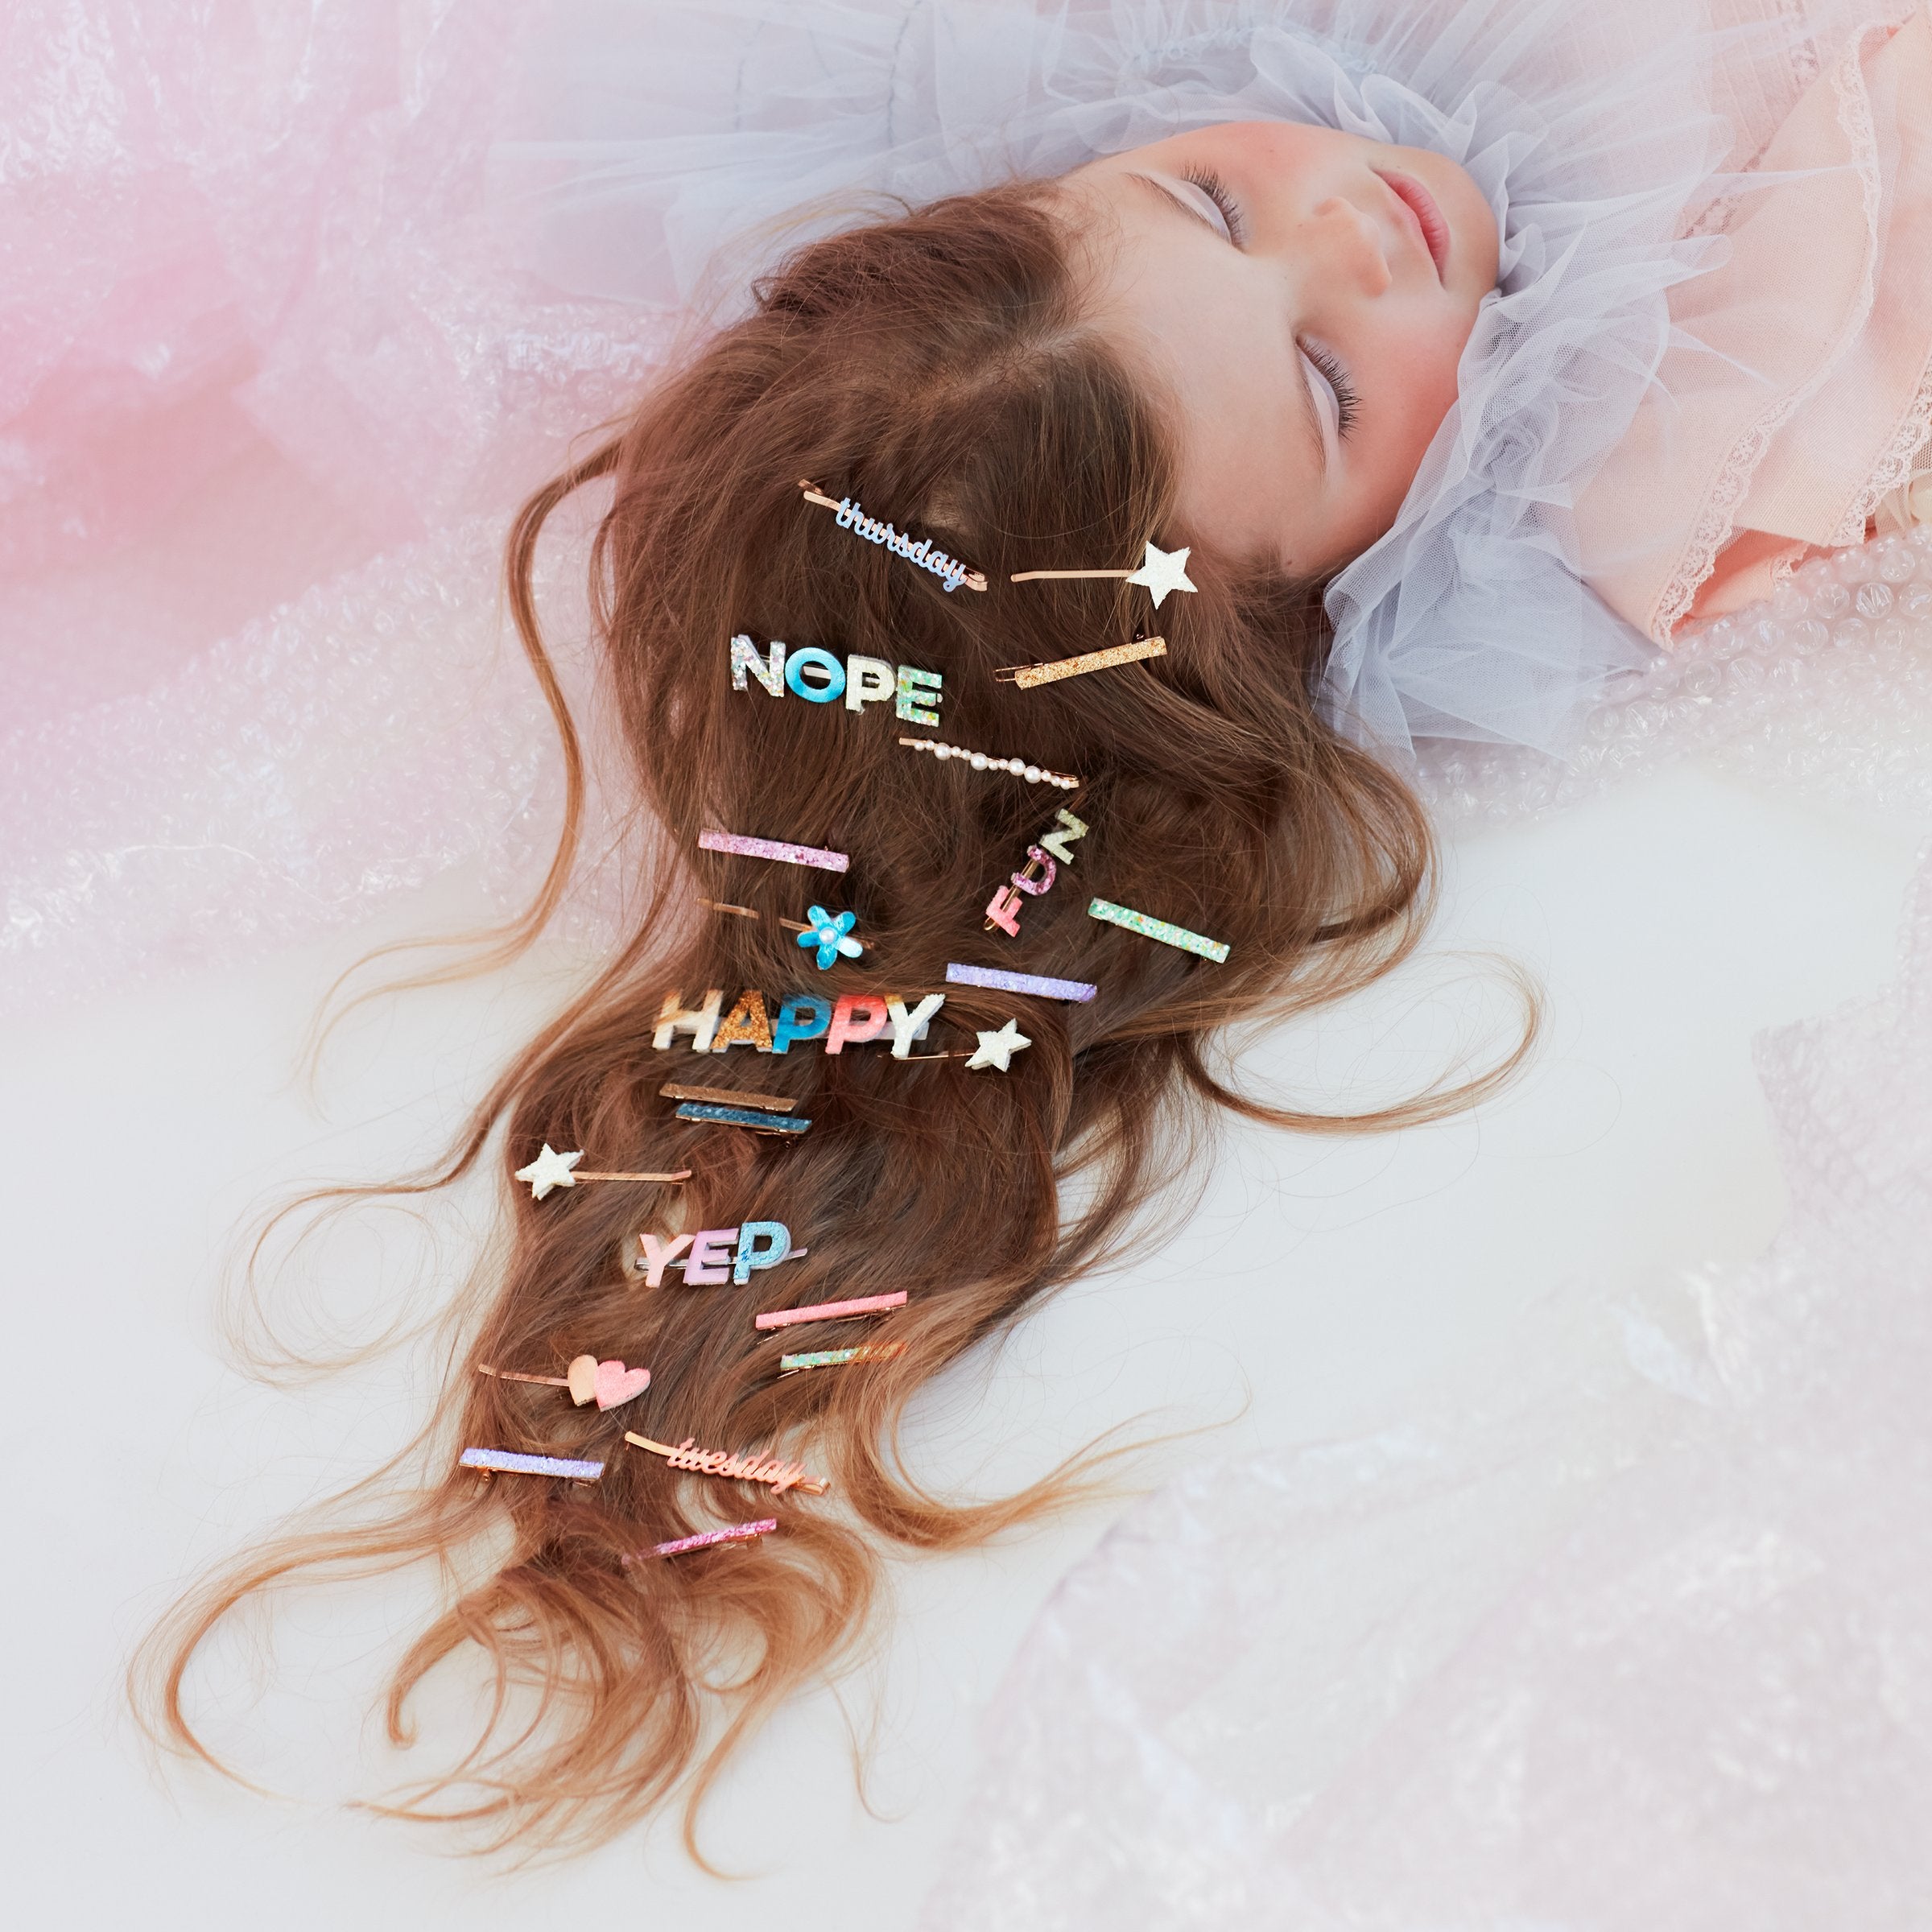 Get great party hair with our glitter hair accessories.